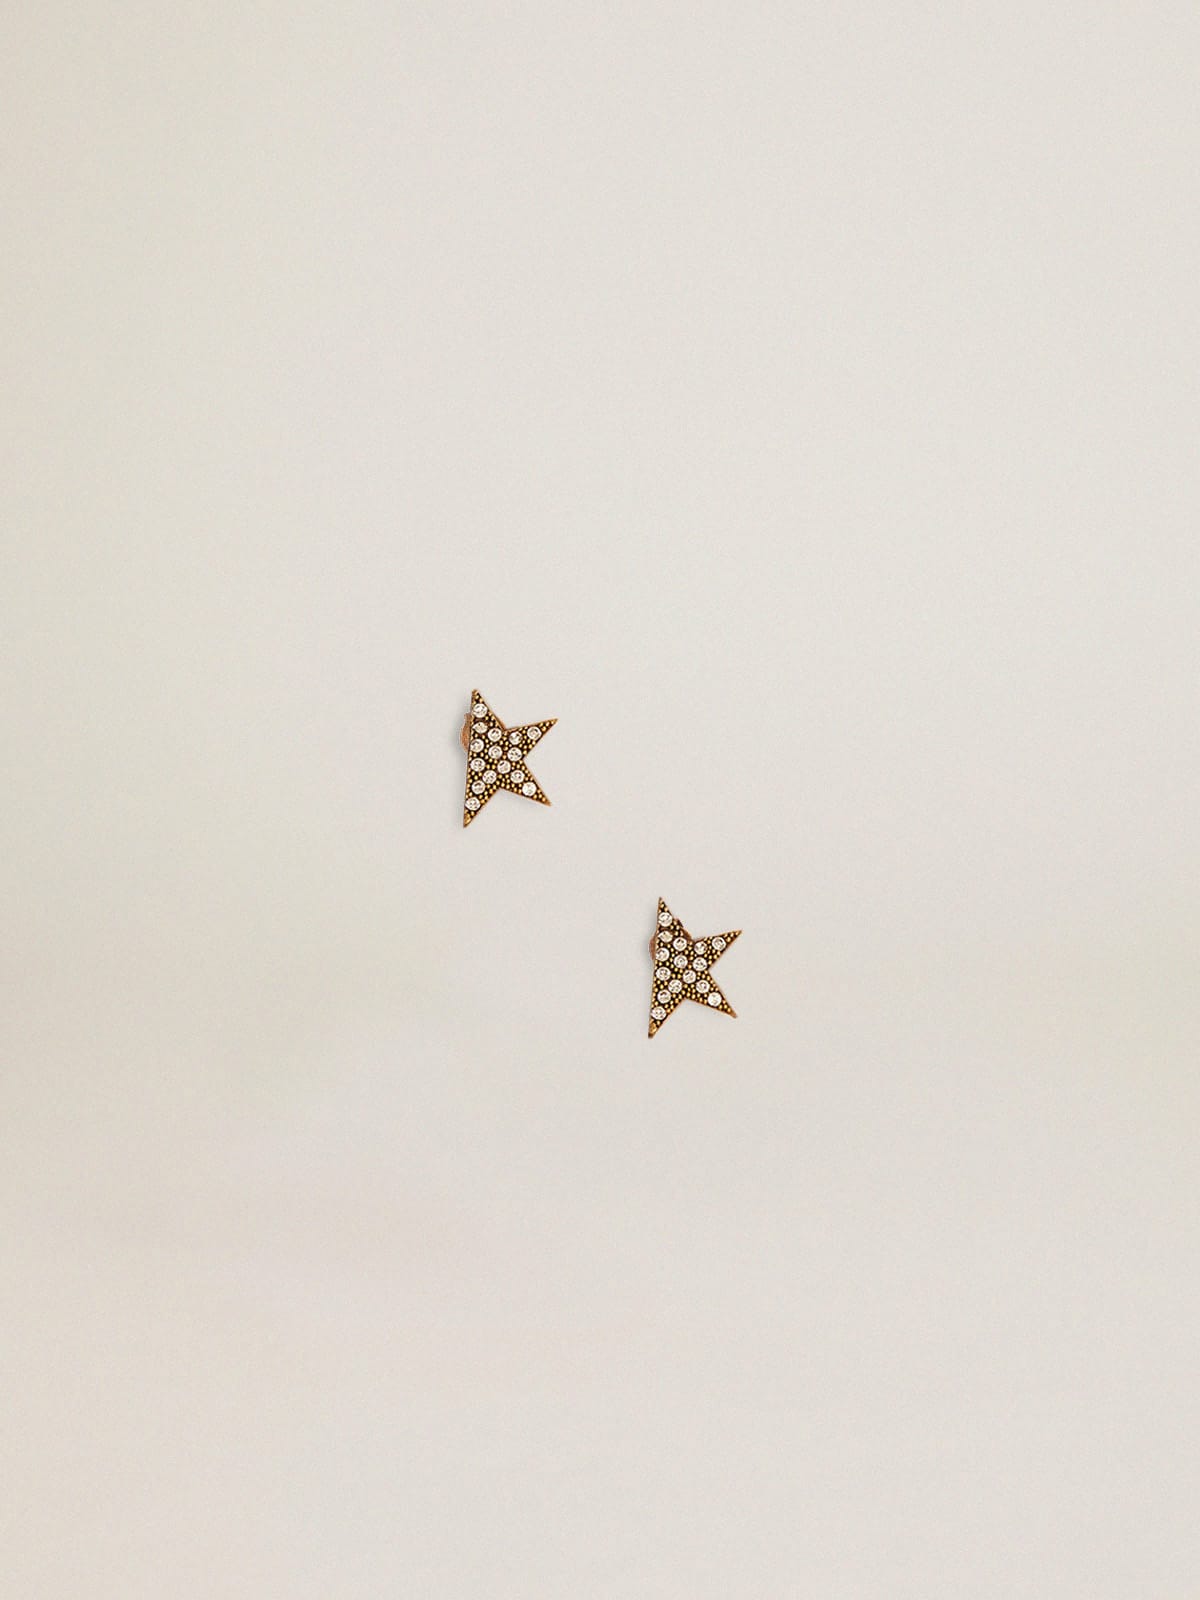 Golden Goose - Women's stud earrings in antique gold color with crystals in 